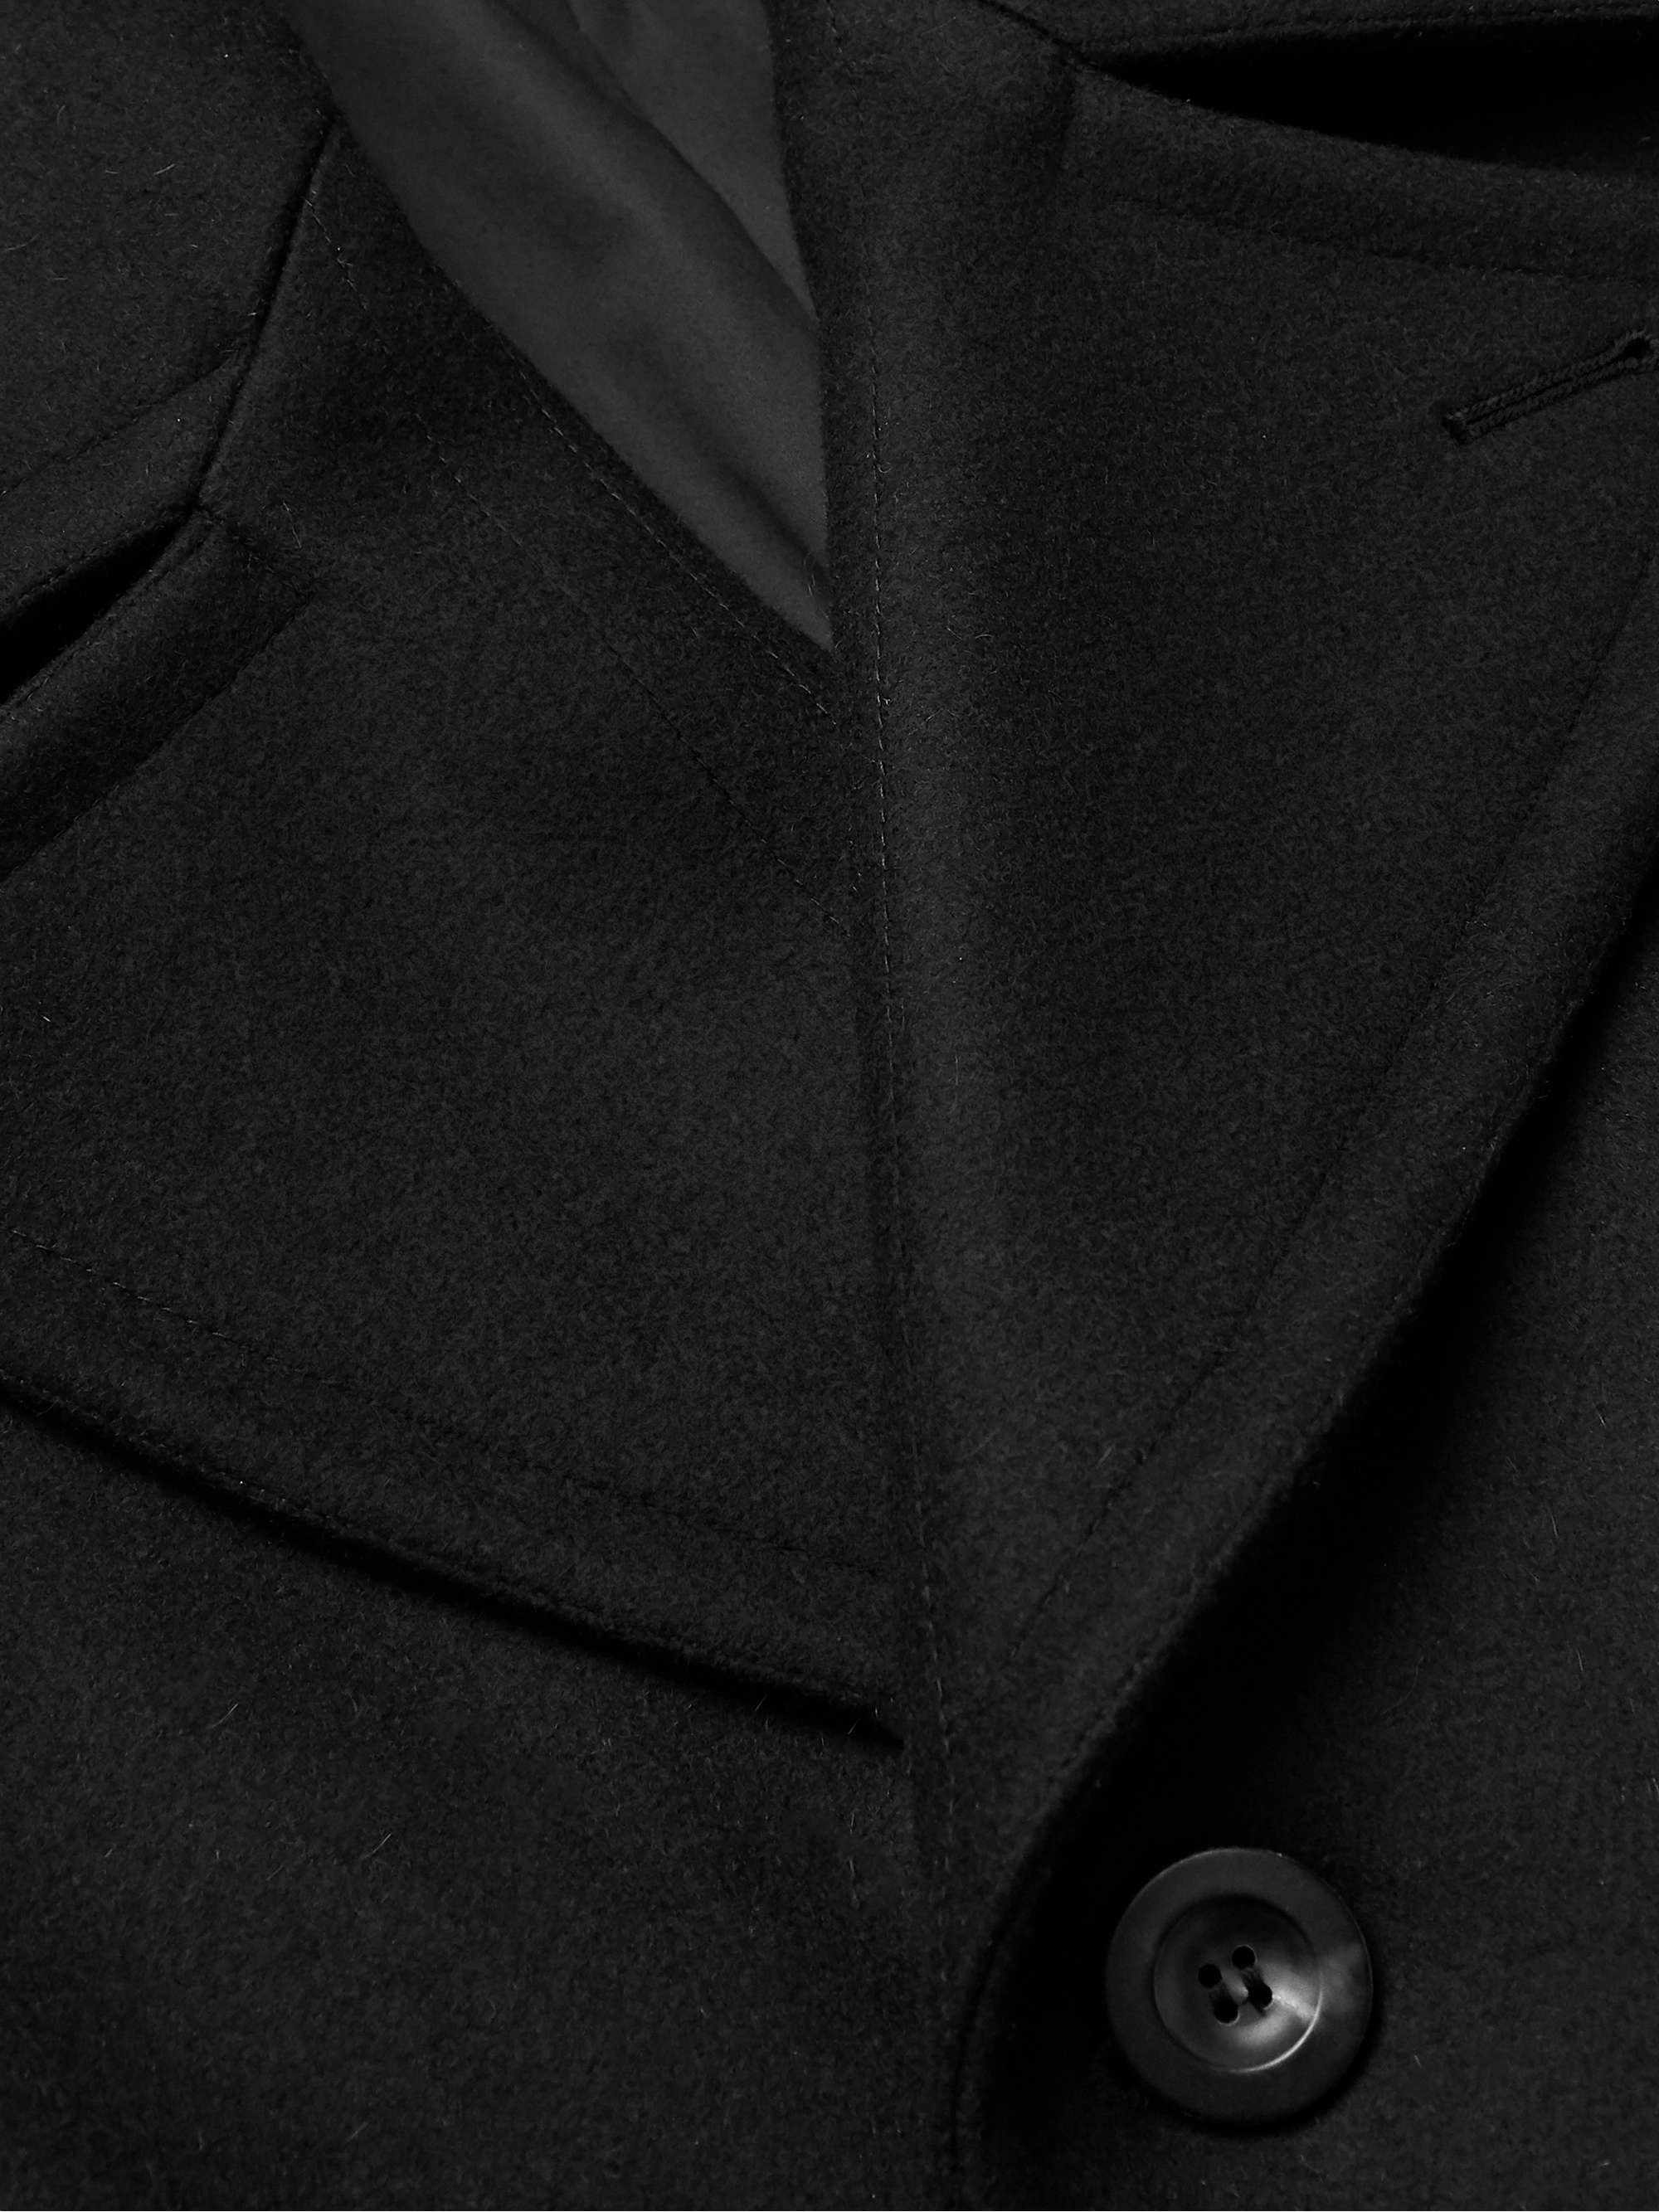 PRIVATE WHITE V.C. Double-Breasted Melton Wool Peacoat